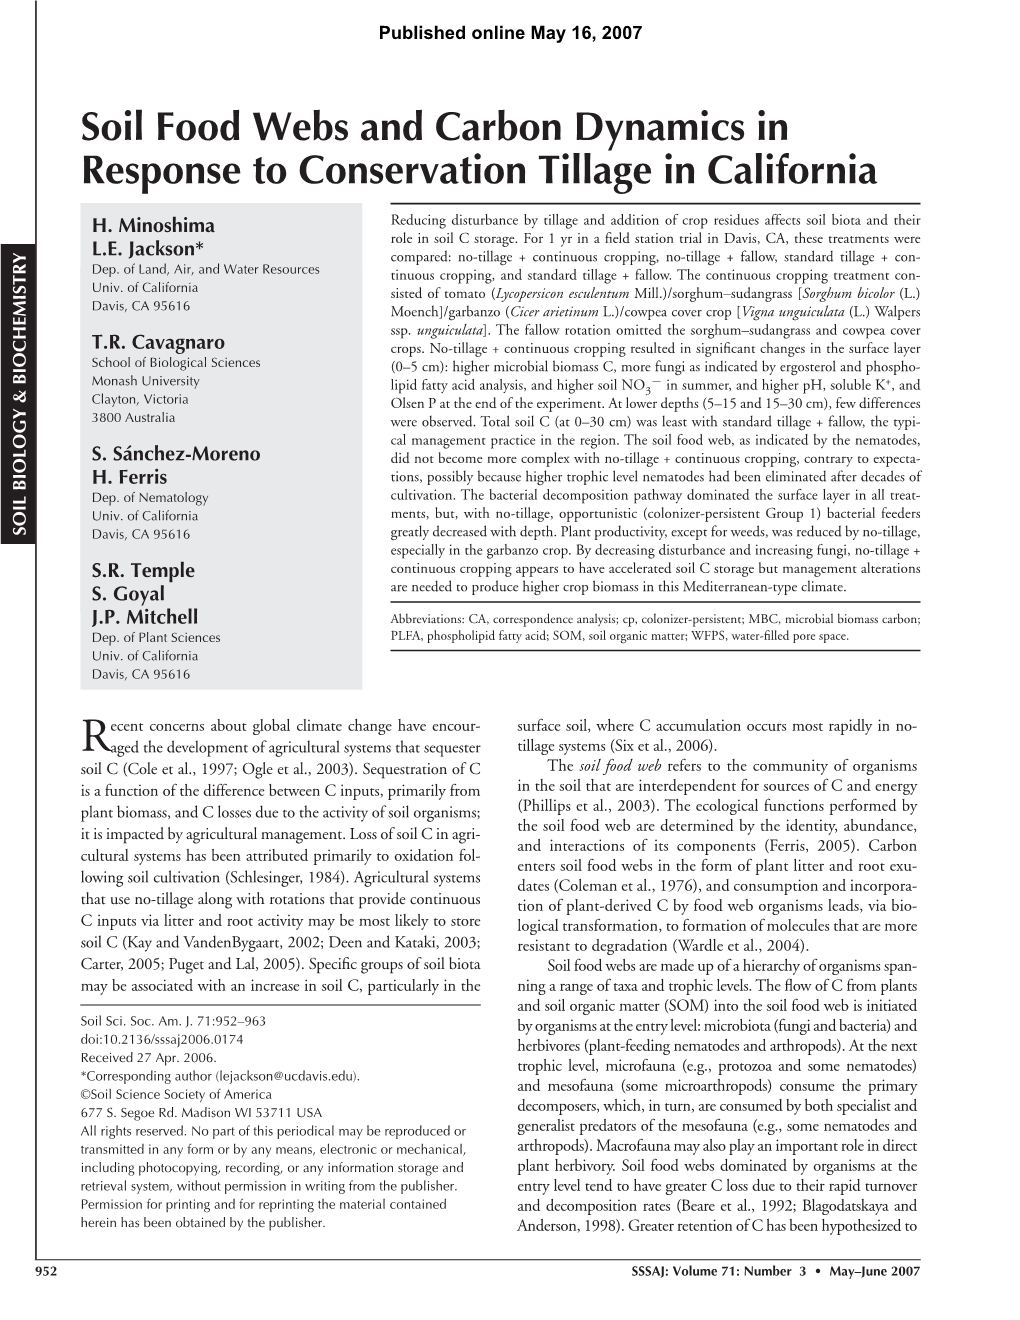 Soil Food Webs and Carbon Dynamics in Response to Conservation Tillage in California